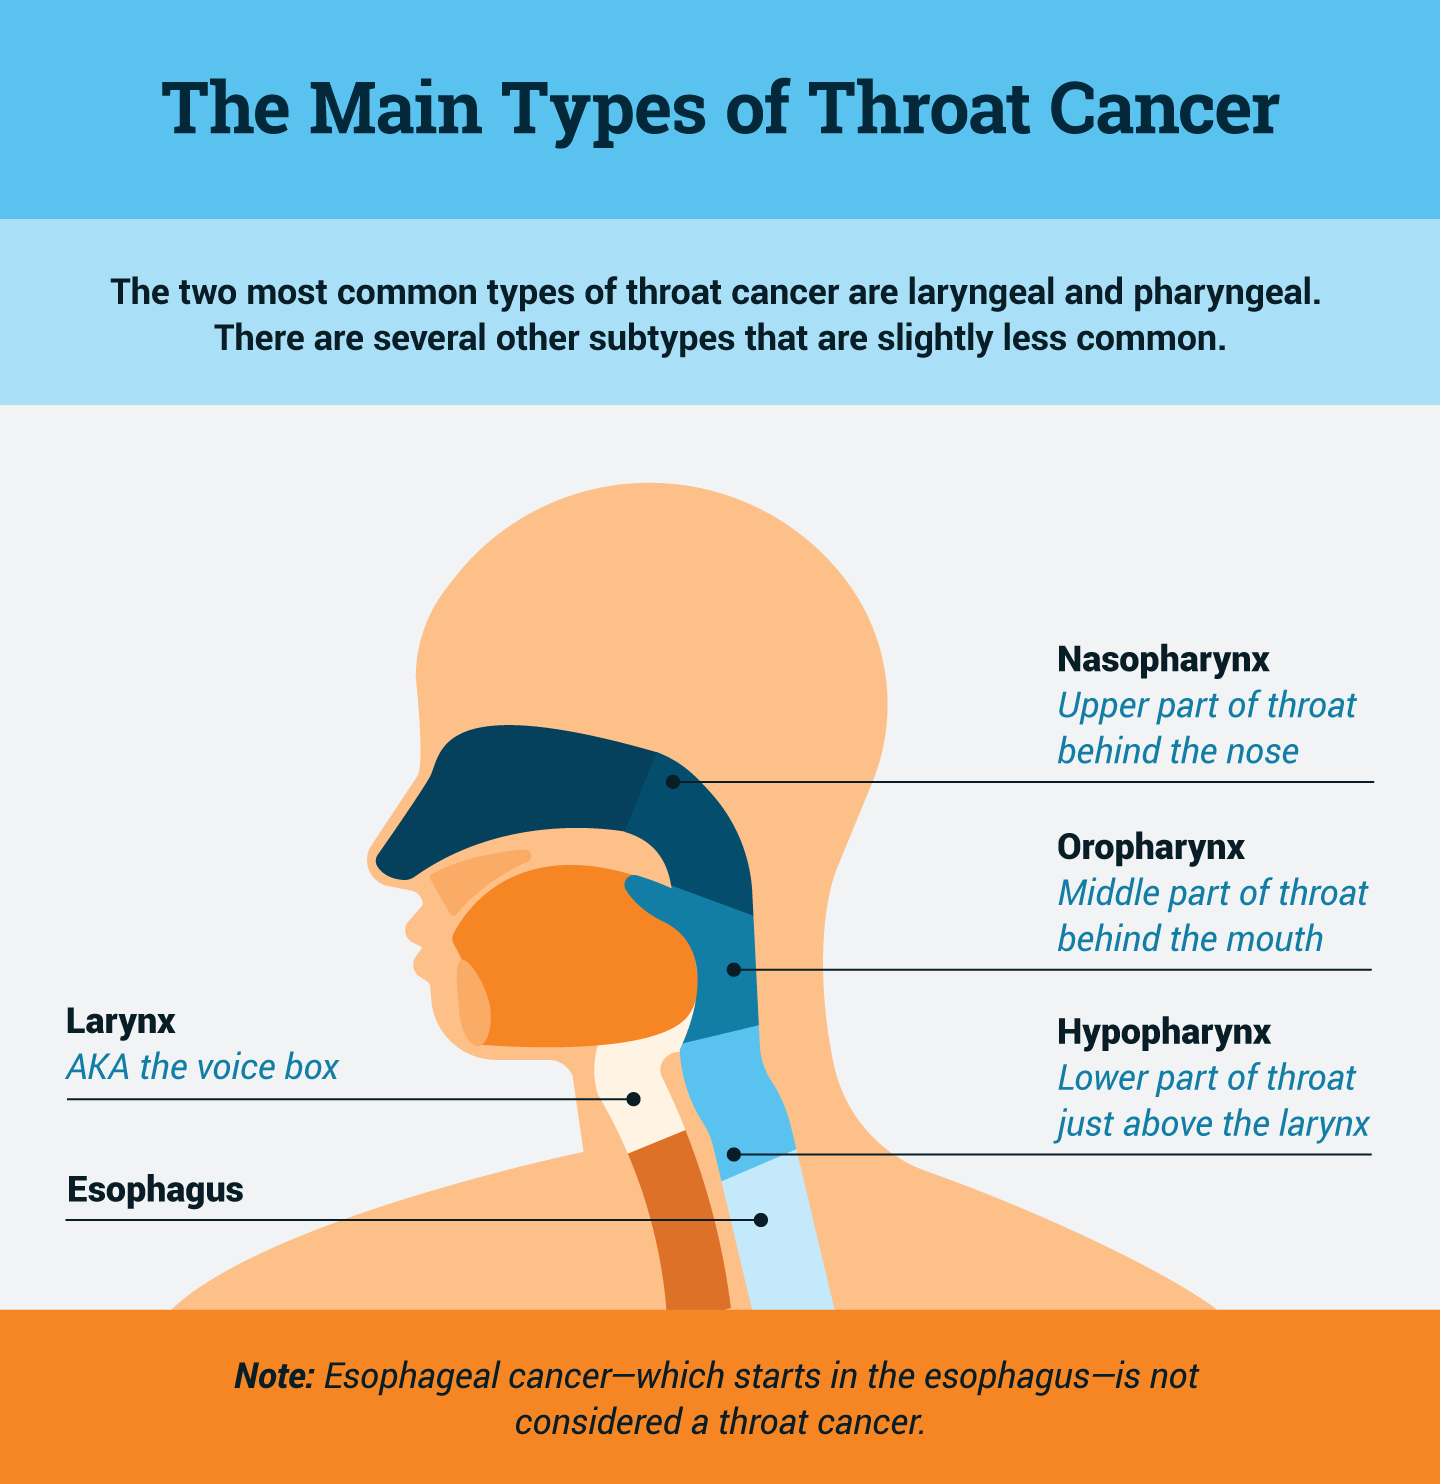 Primary types of throat cancer